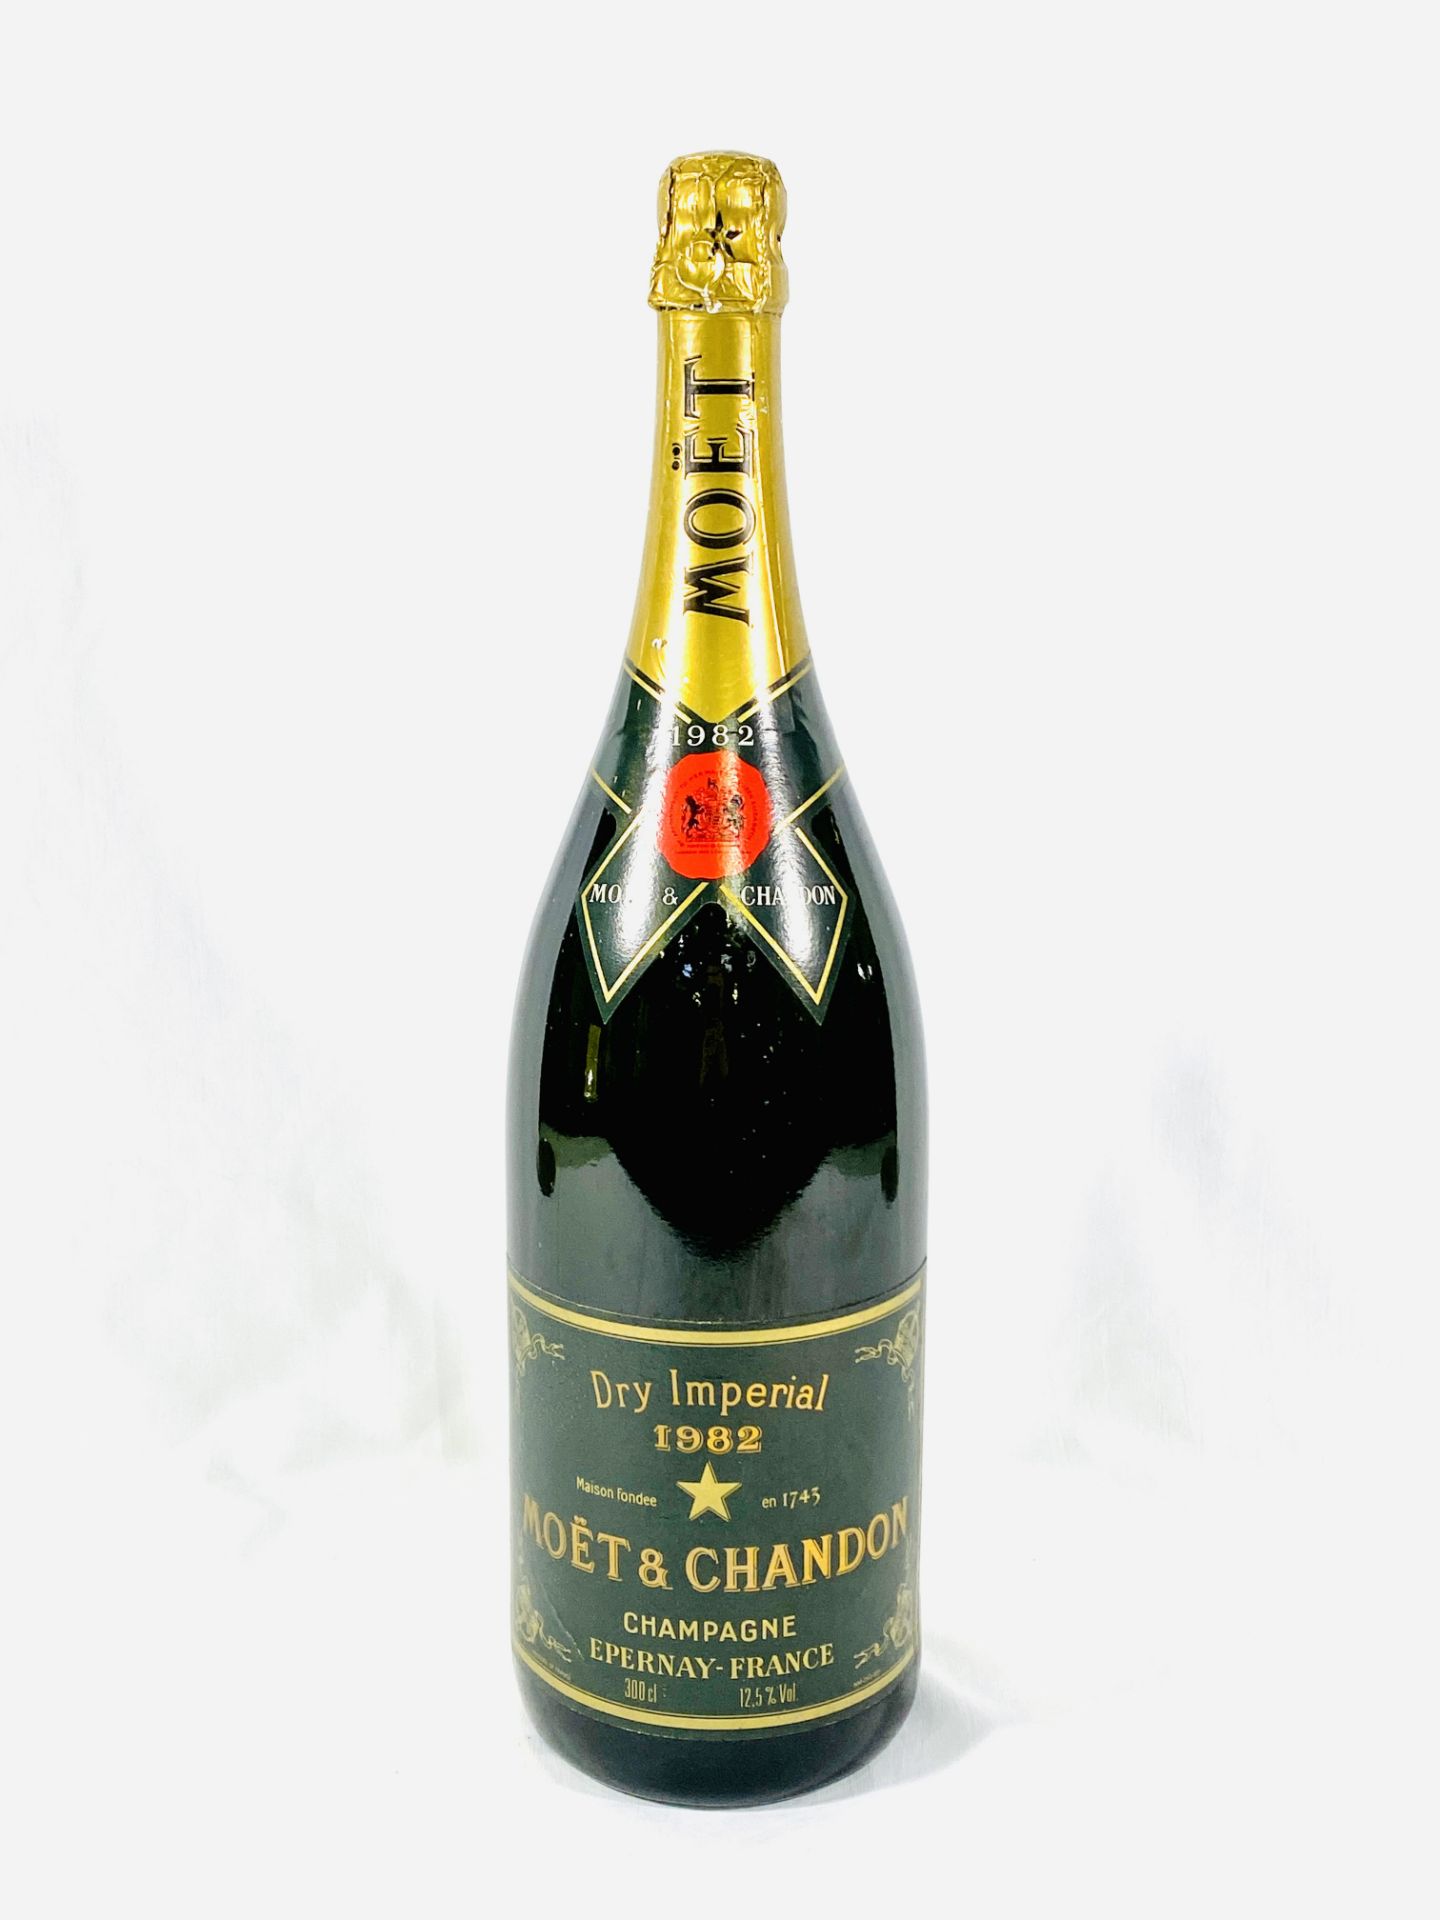 Jeroboam of Moet and Chandon champagne